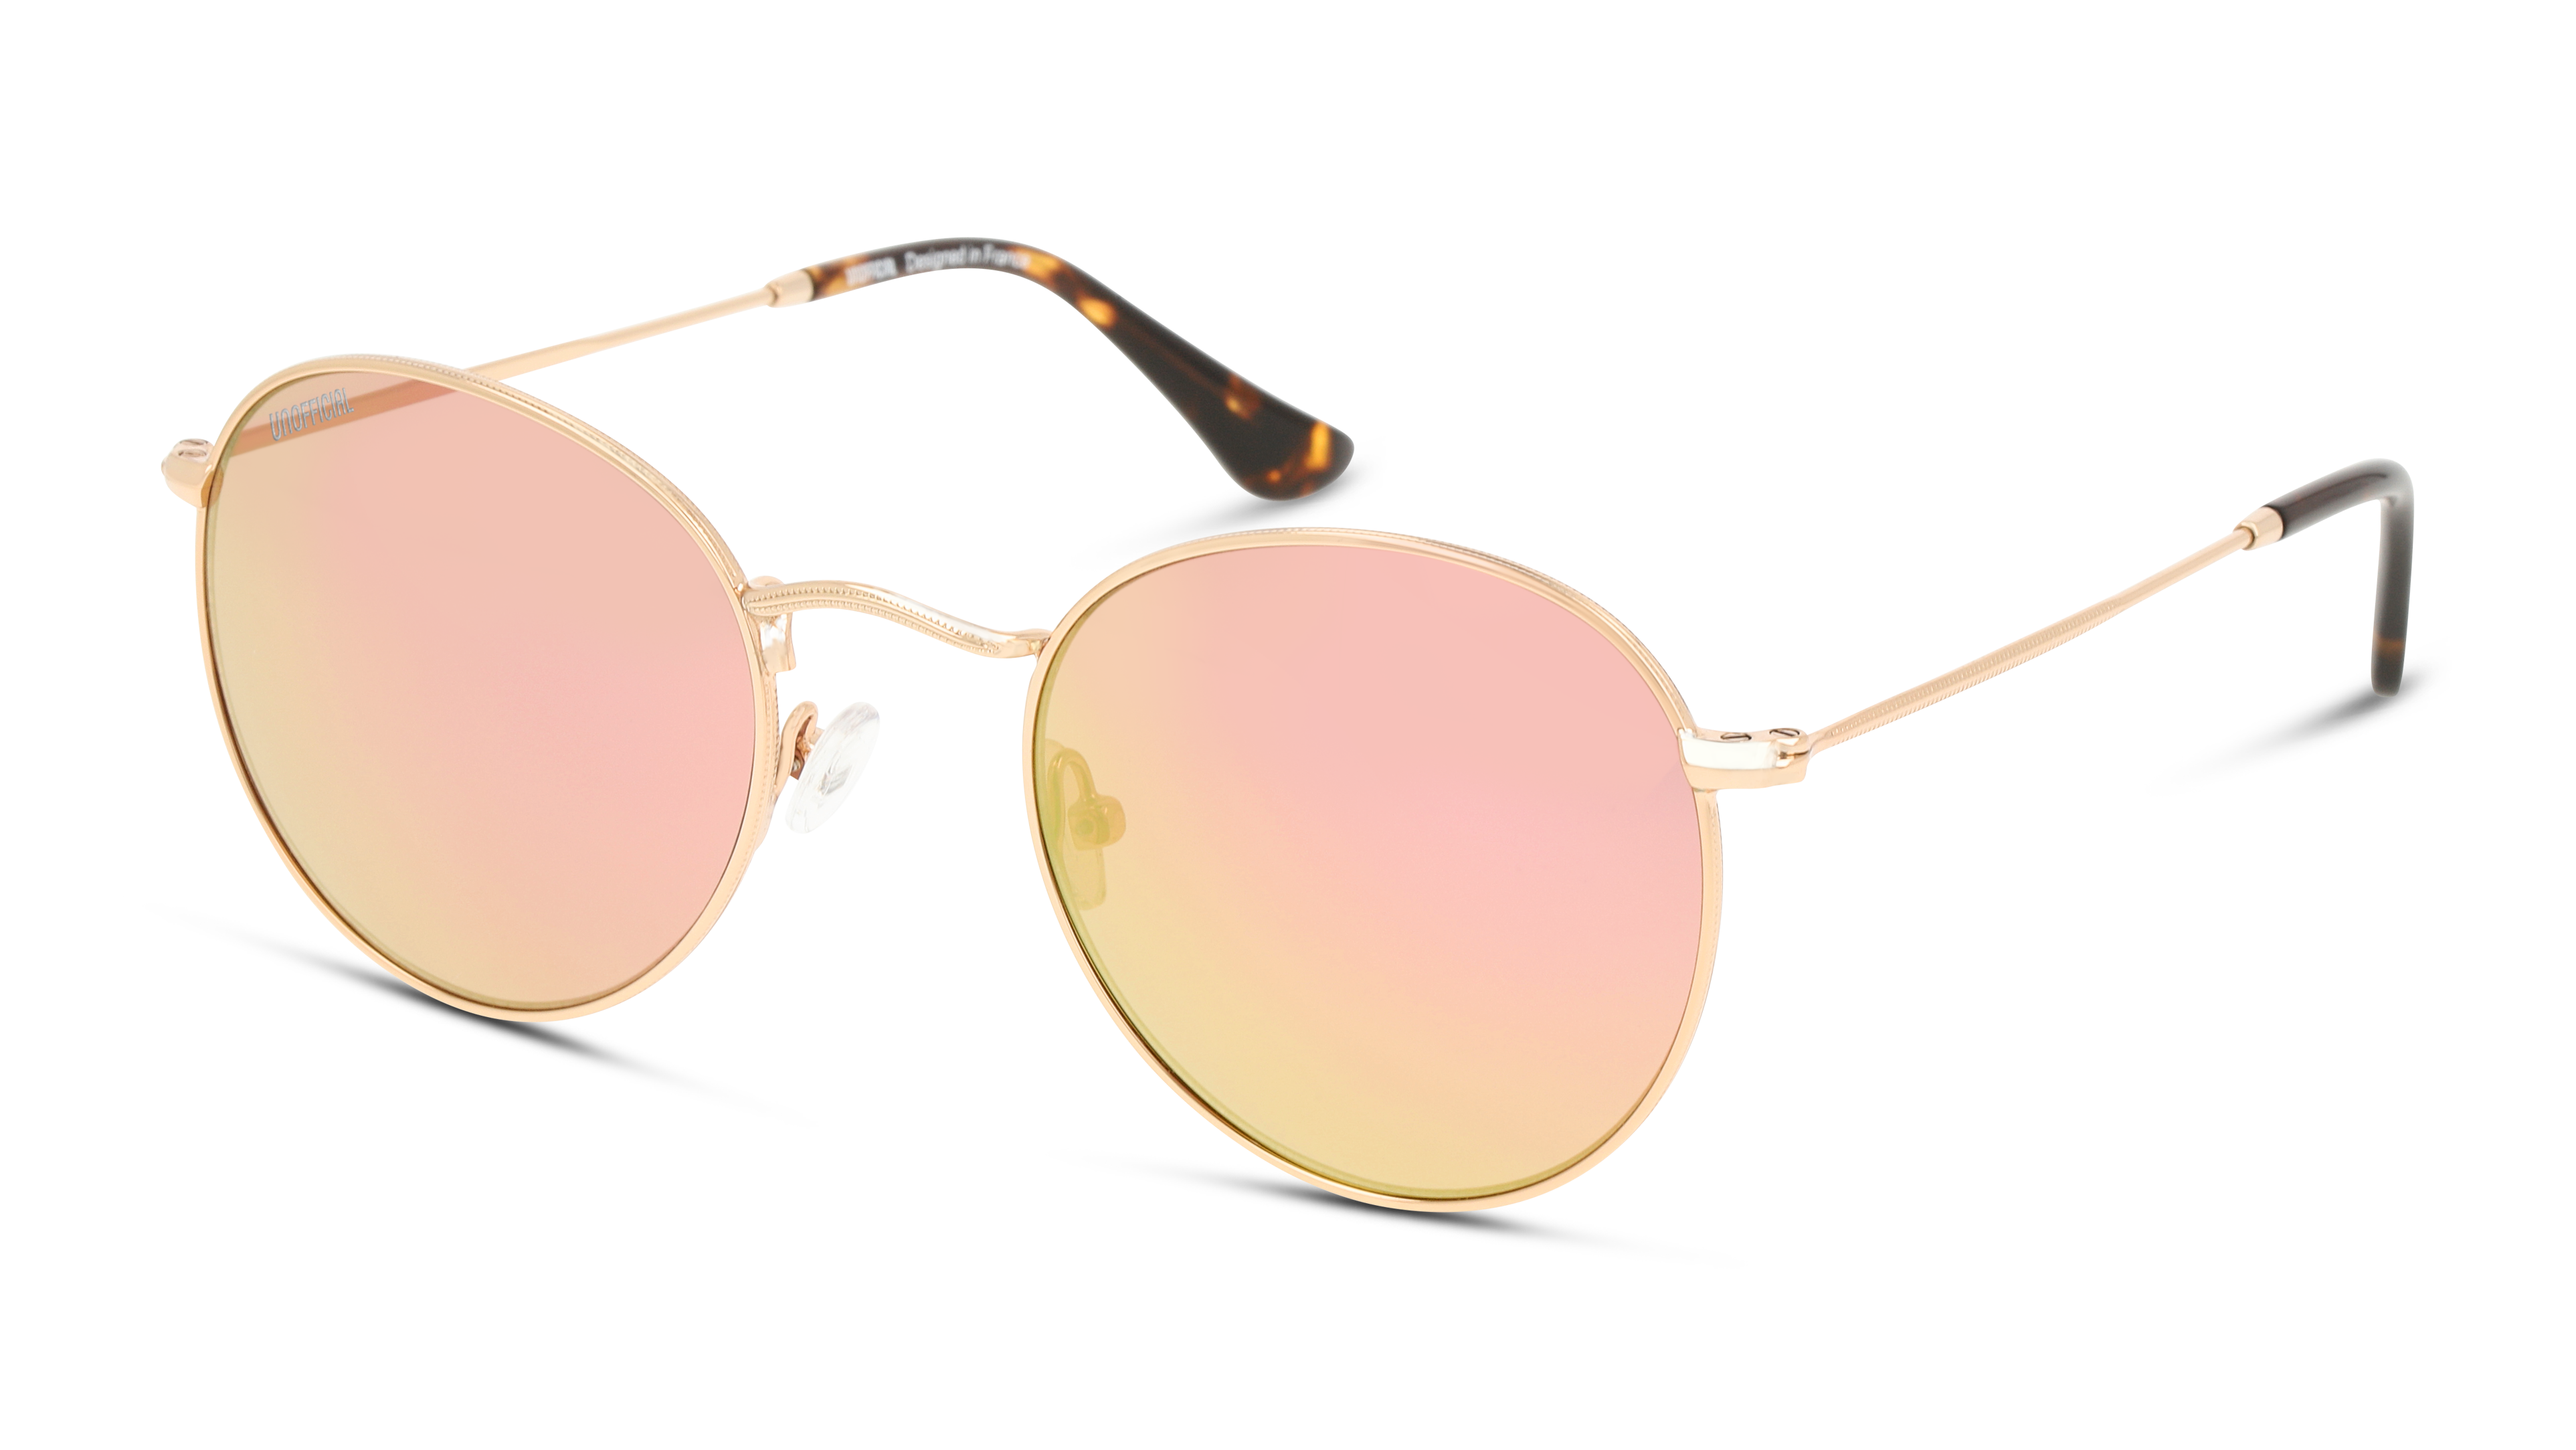 Angle_Left01 Unofficial UNSU0050 (DDPP) Sunglasses Pink / Gold